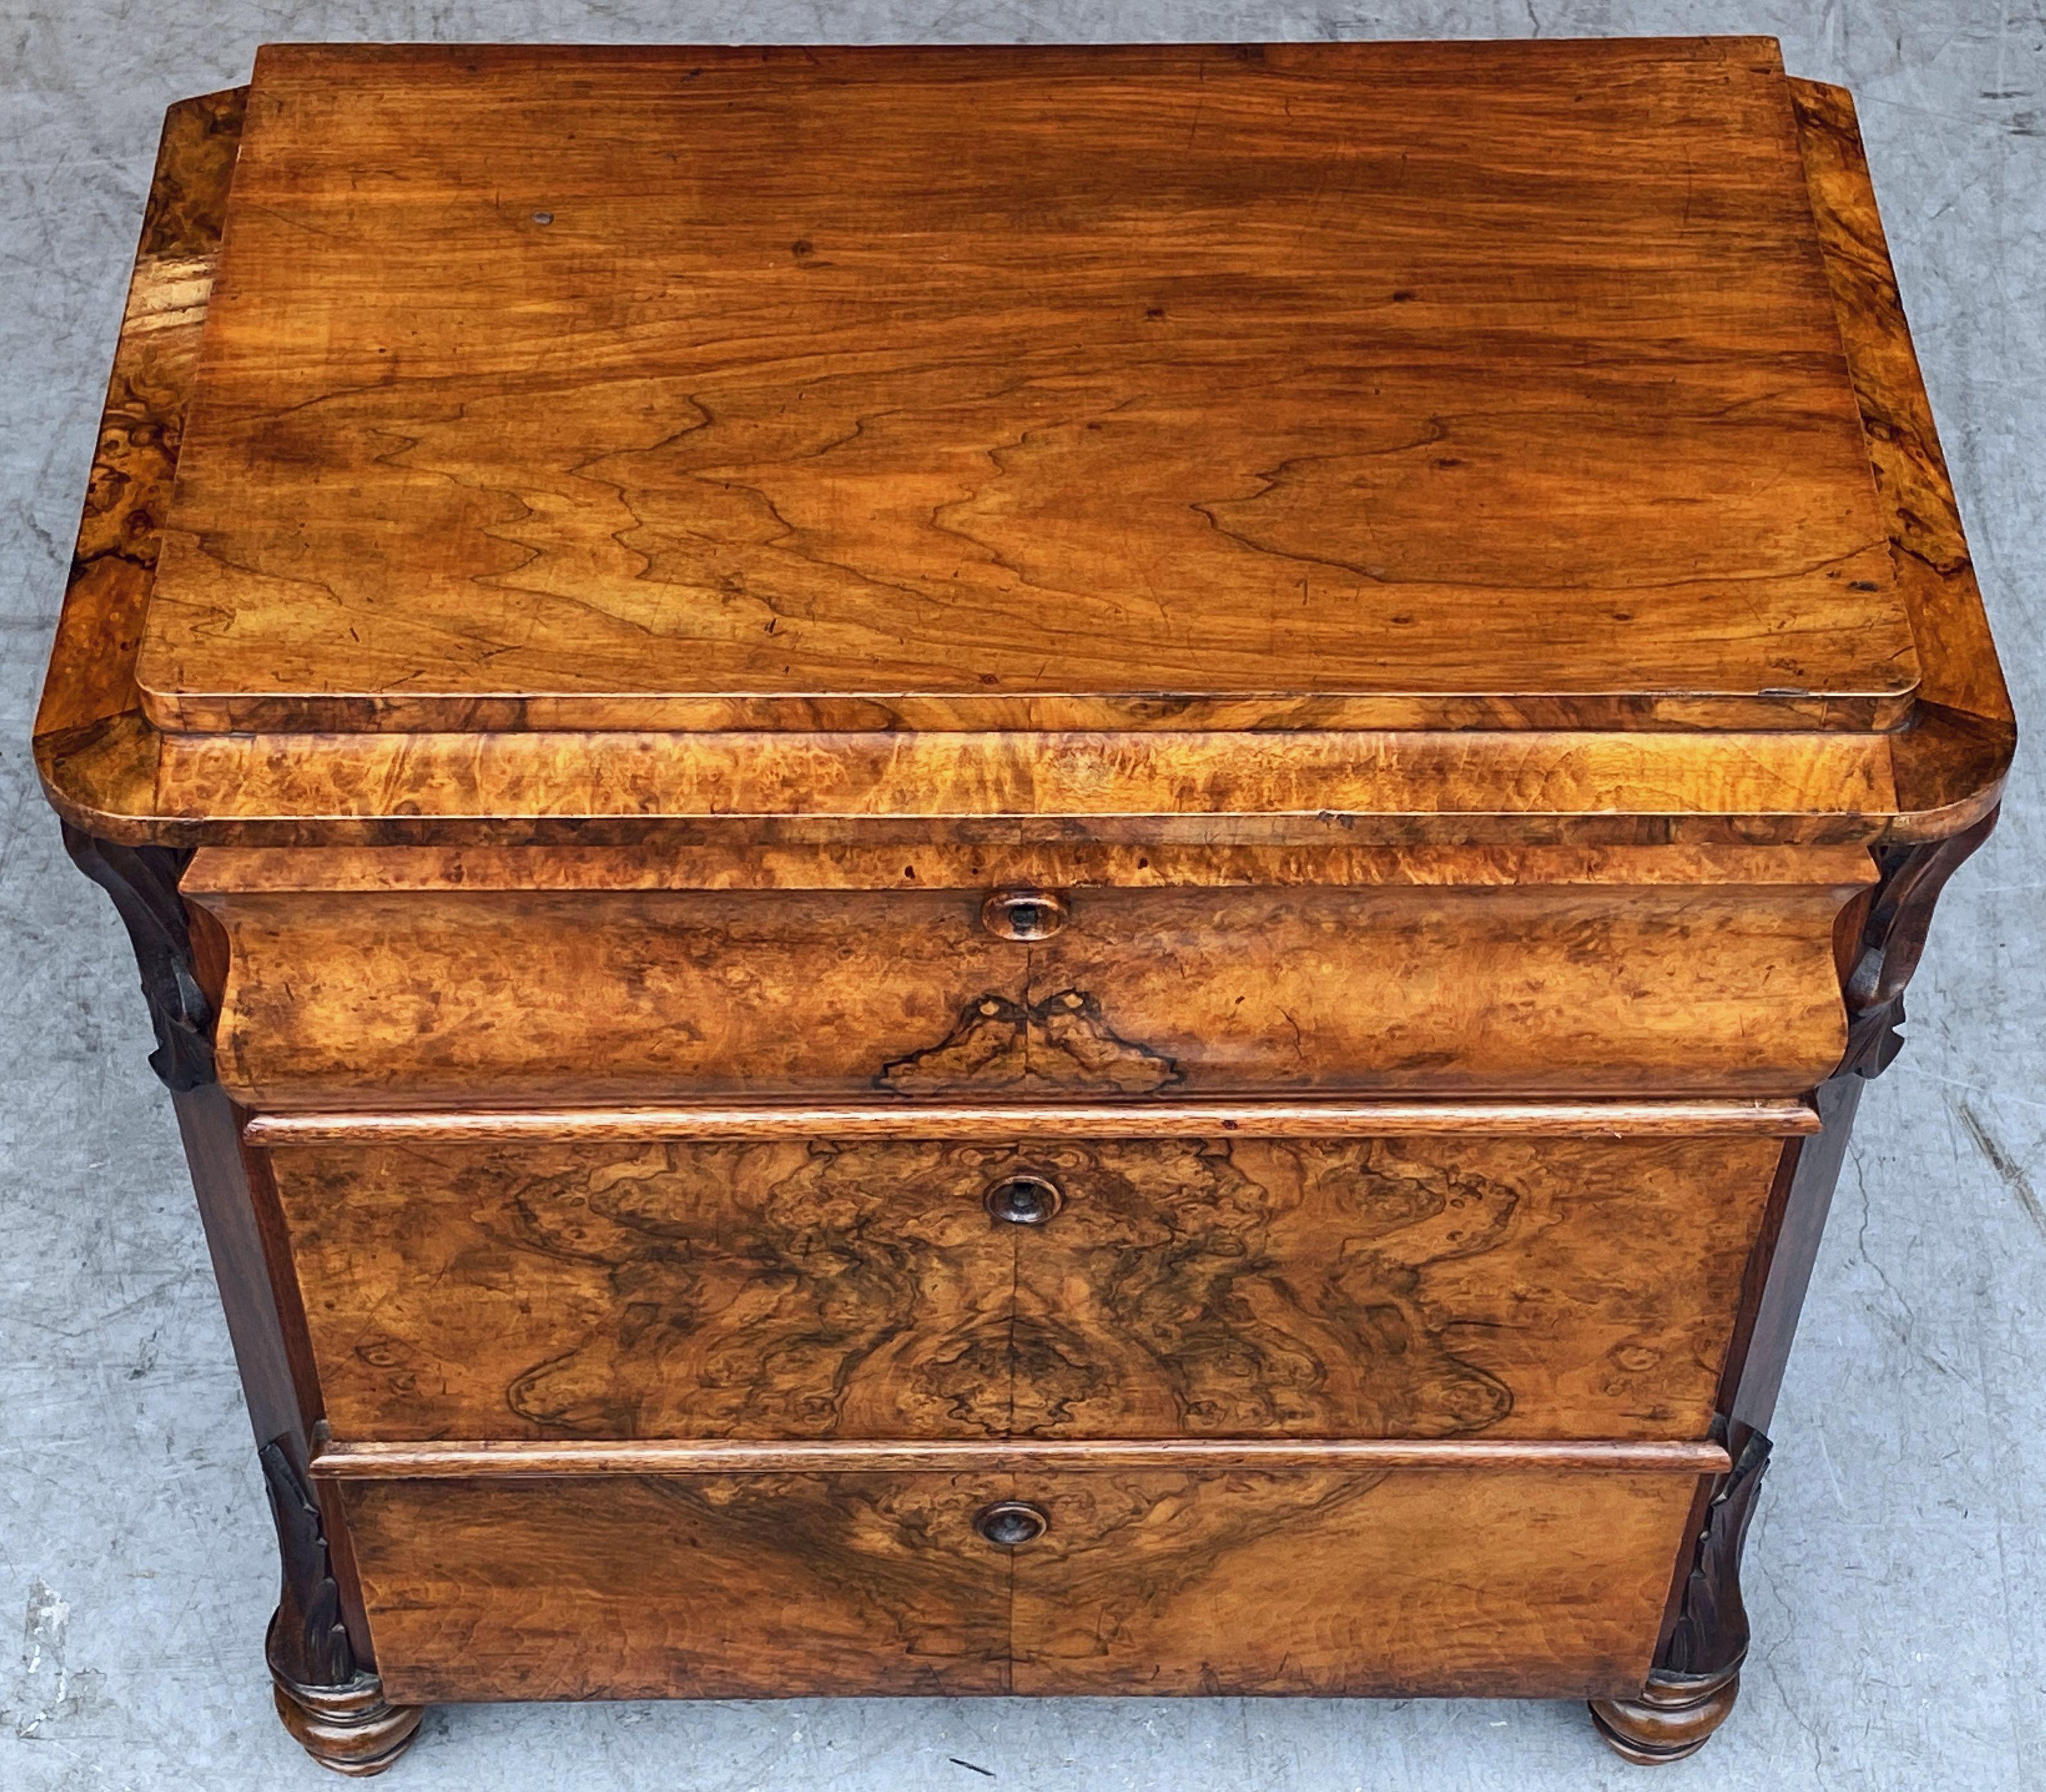 20th Century Small English Chest or Commode of Burr Walnut from the Edwardian Era